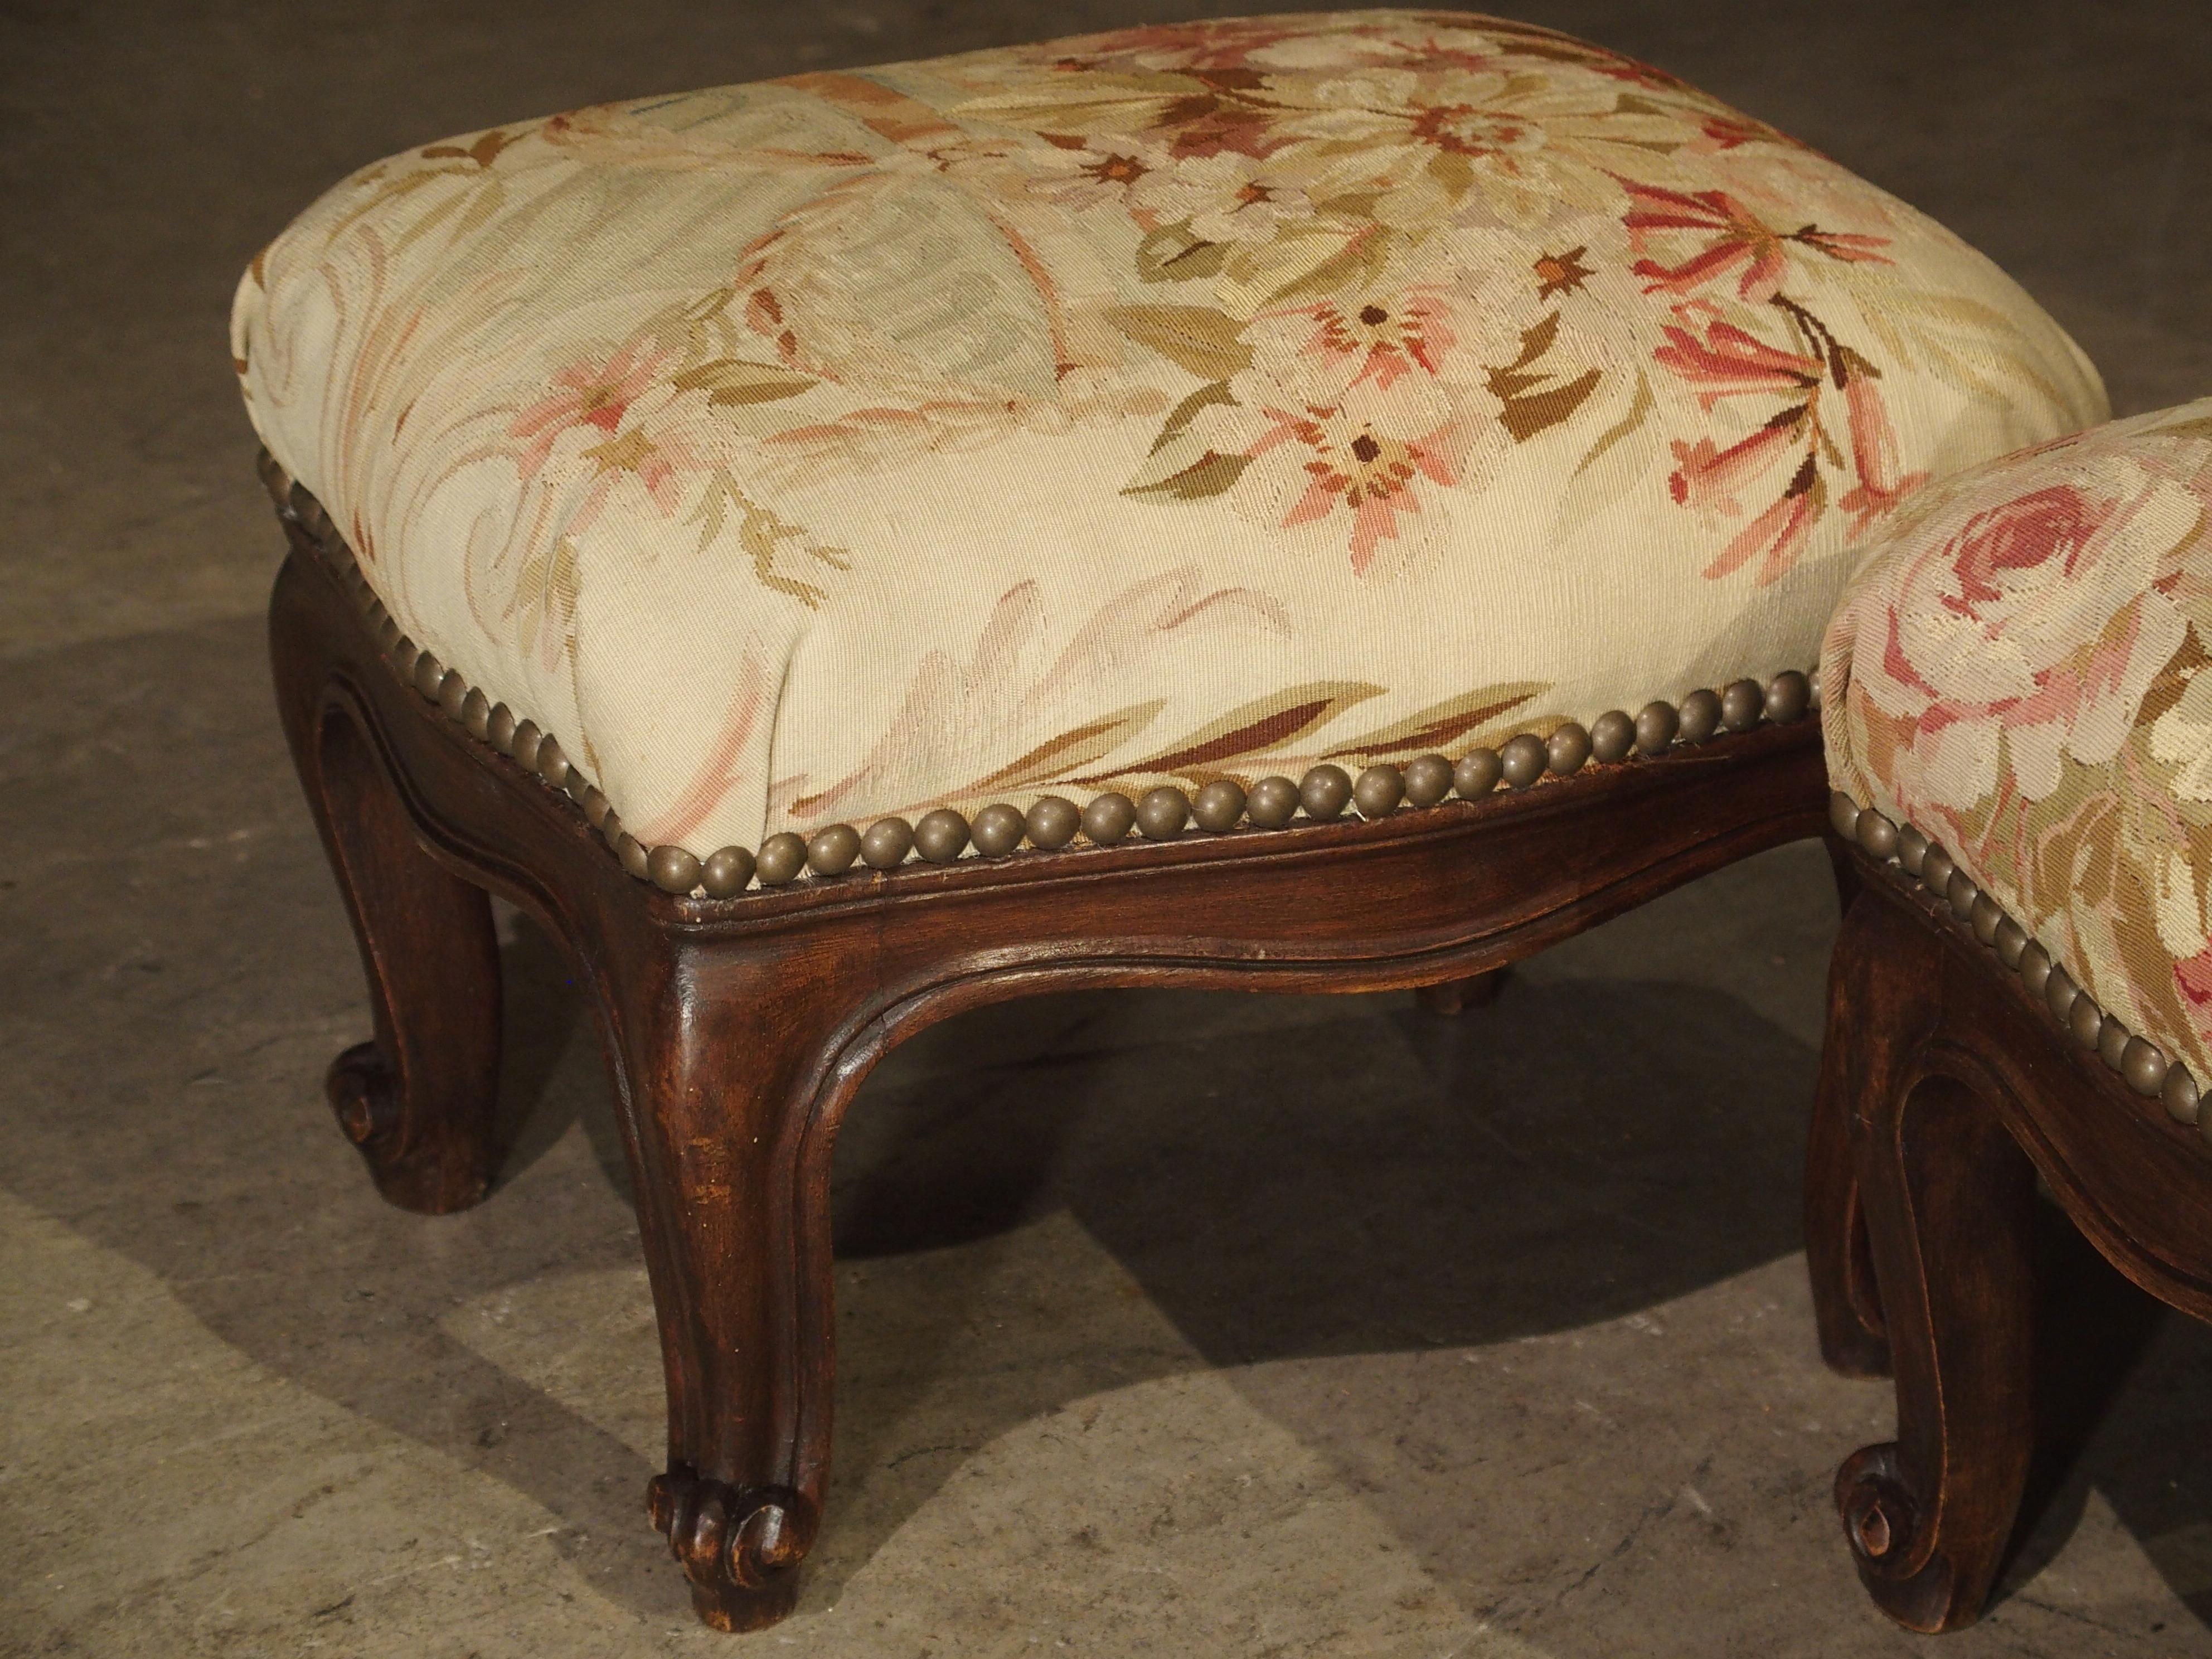 20th Century Pair of Small French Louis XV Style Footstools with Antique Aubusson Silk Fabric